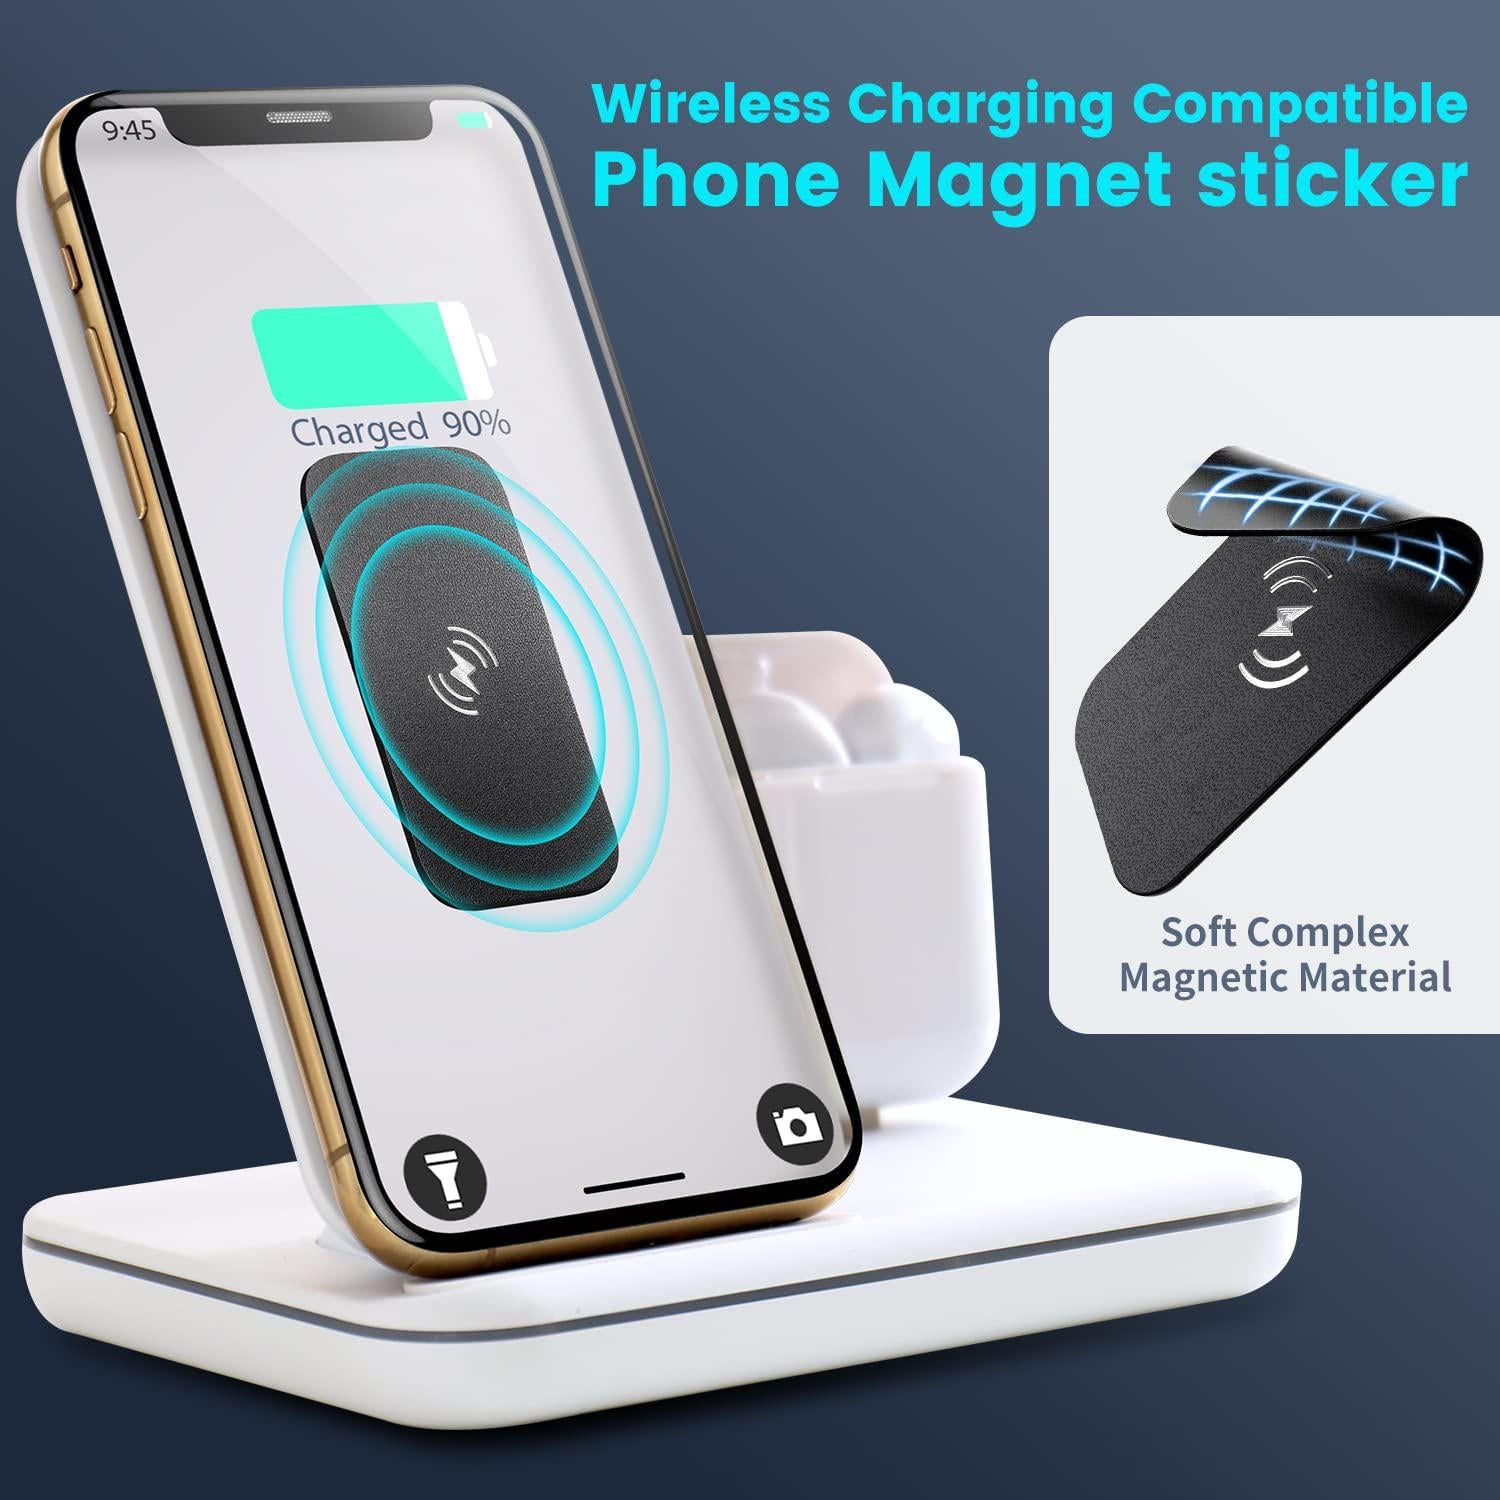 eSamcore, eSamcore Cell Phone Magnet Sticker Allows Wireless Charging, Comes with Magnetic Phone Mount for car, Soft Magnetic Plate for car Phone Holder Mount Vent Clip Compatible with Samsung Galaxy iPhone